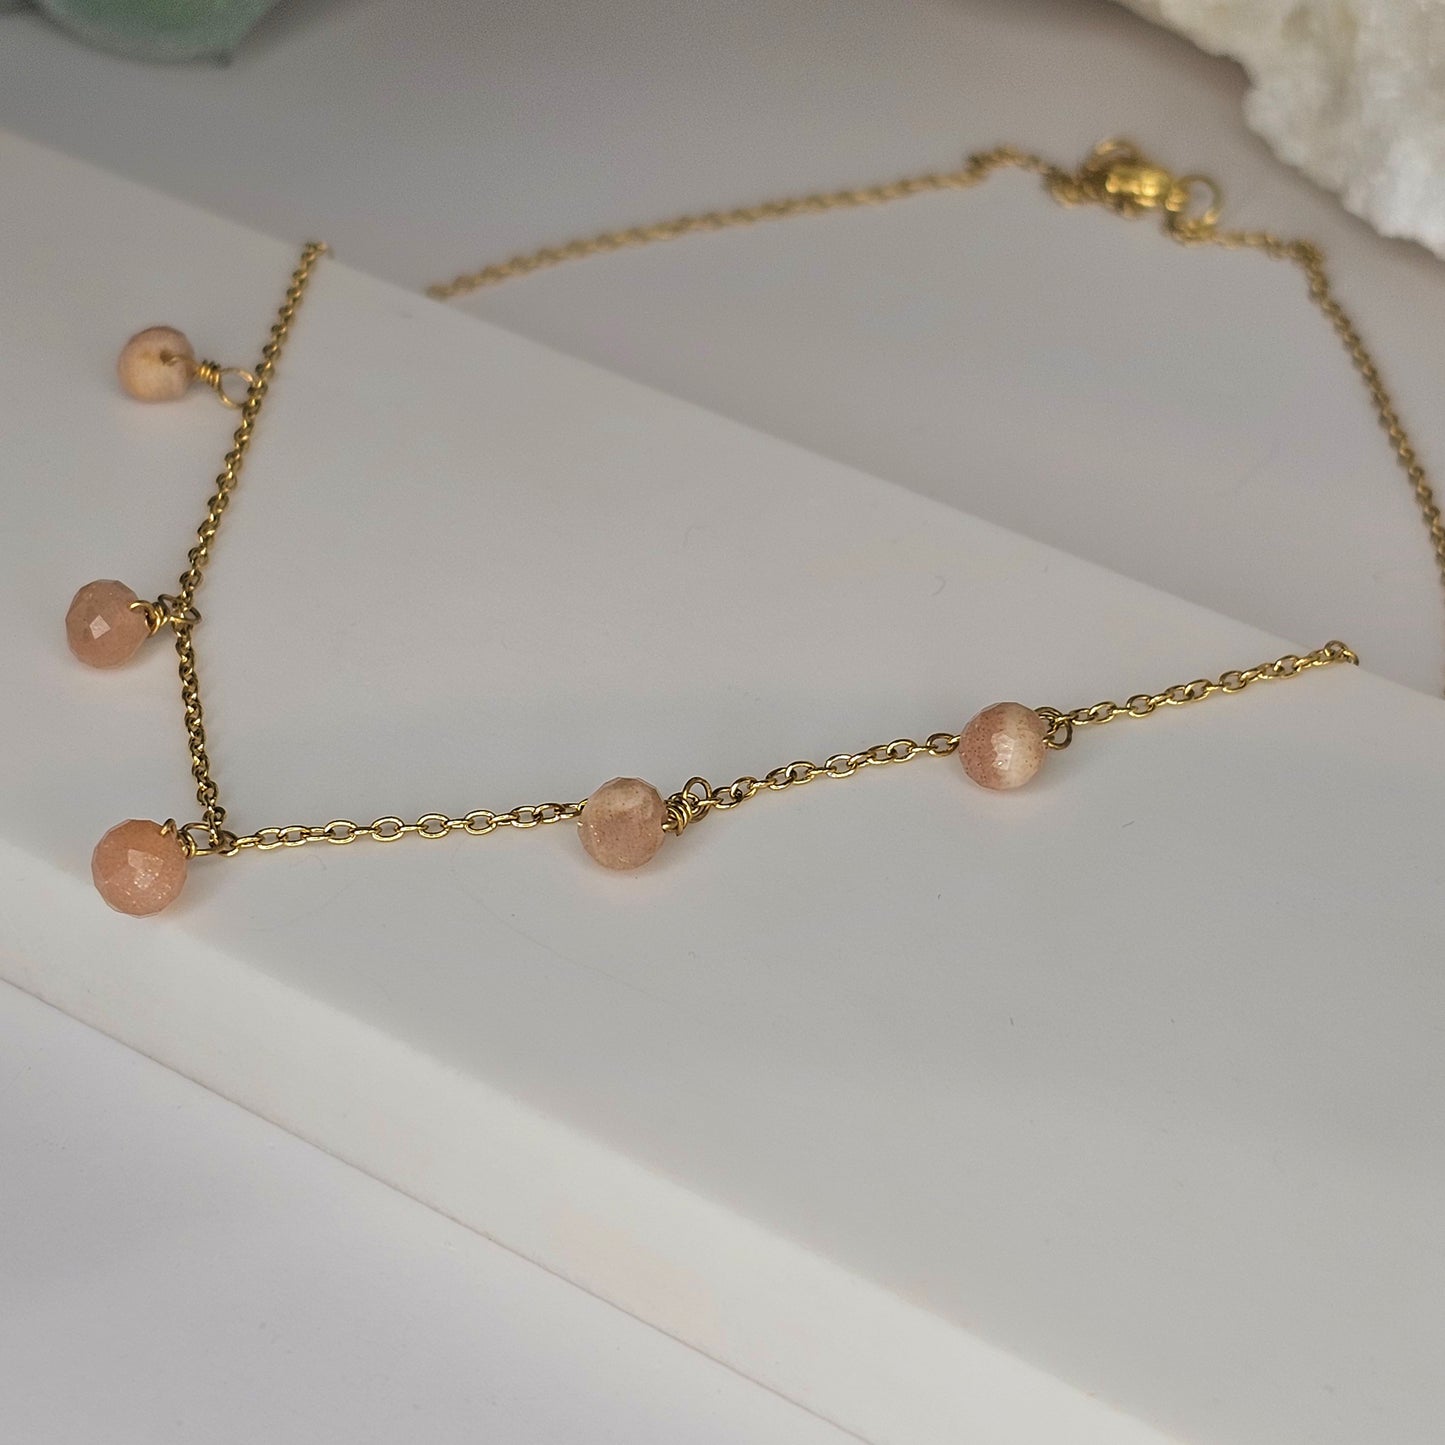 Fine gold toned stainless steel chain adorned with five dainty Sunstone beads.